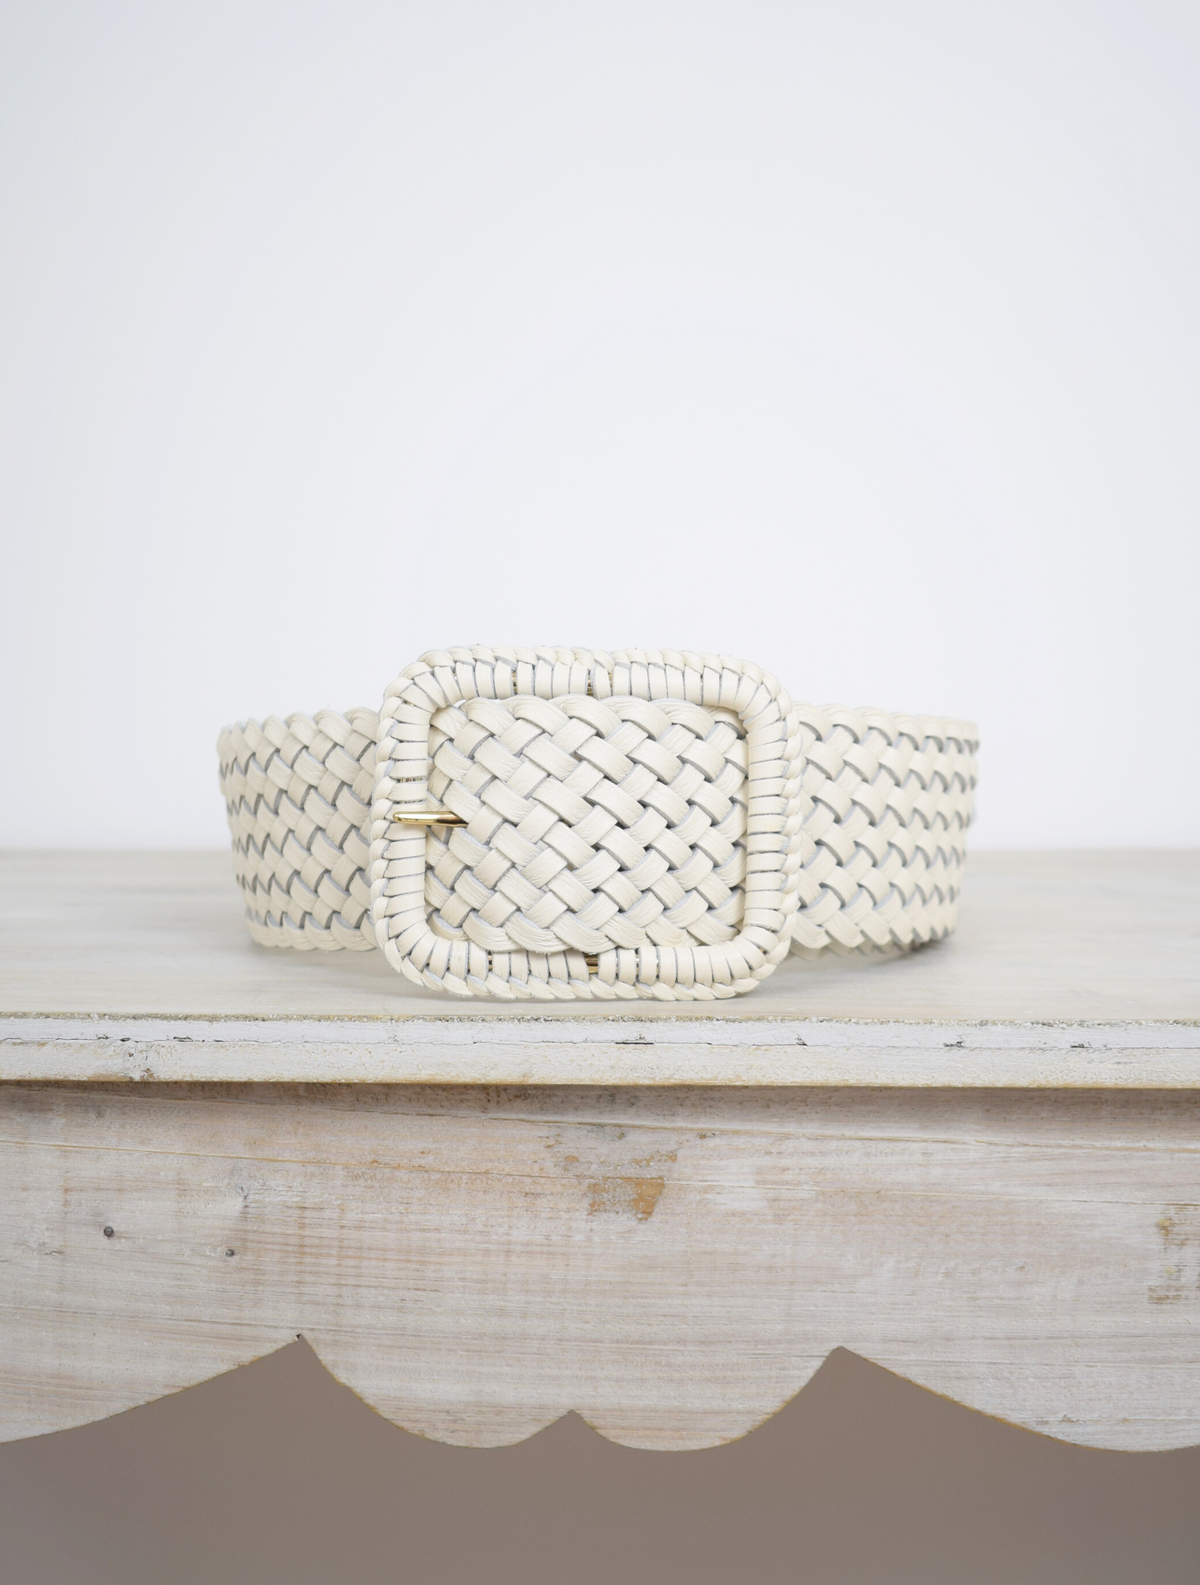 Wide plaited ivory leather belt with oblong leather bound buckle